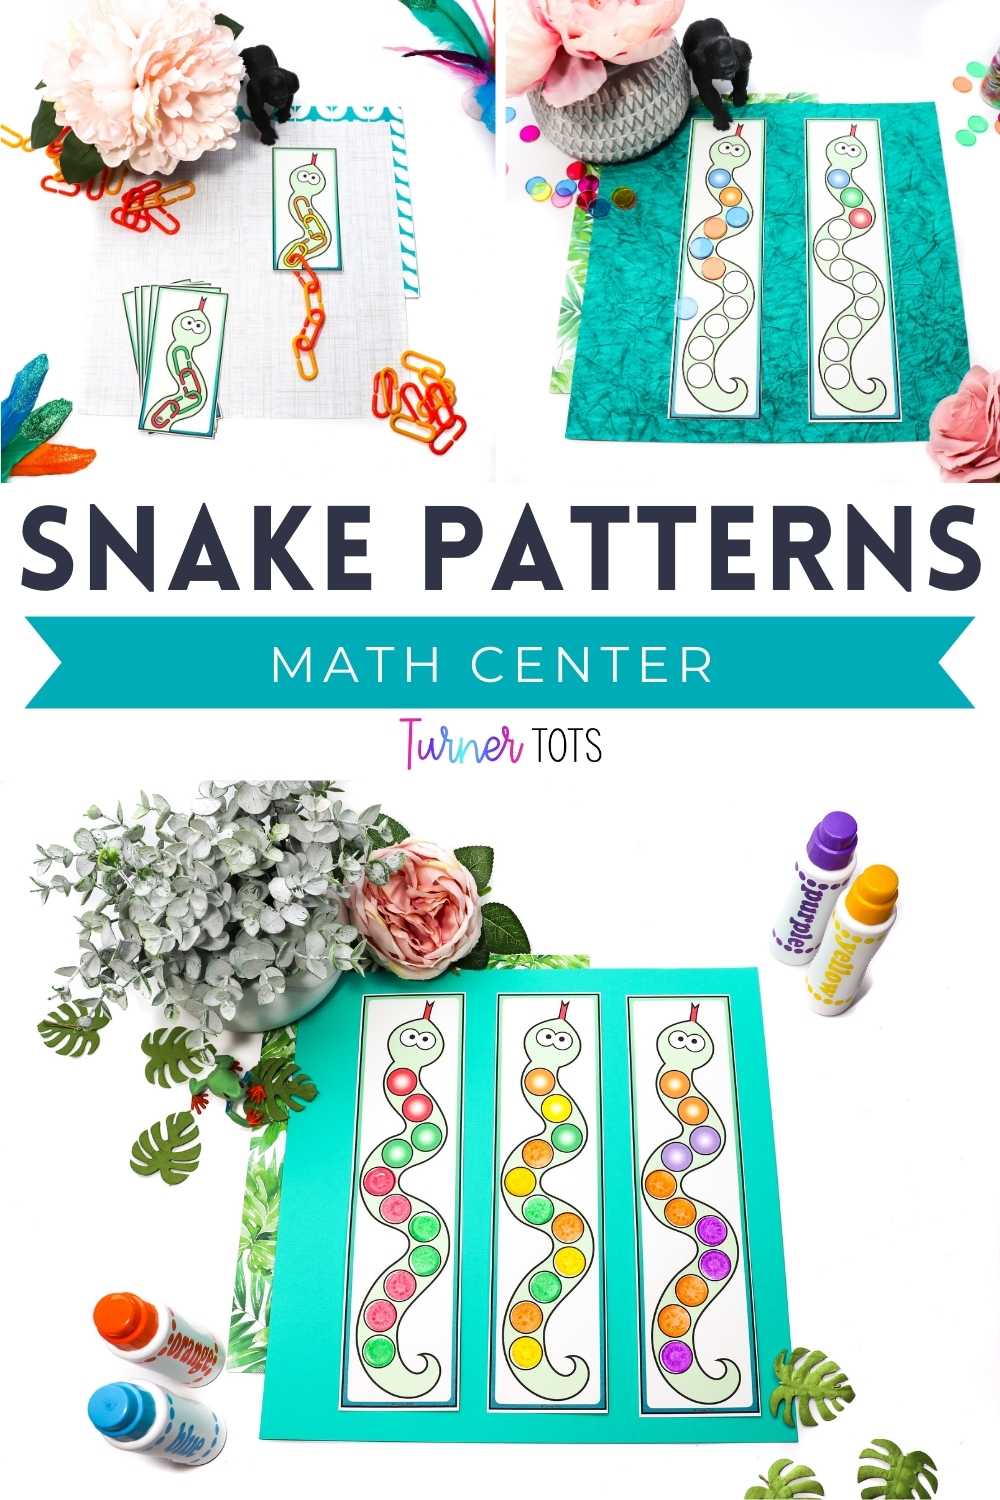 Snake pattern cards for preschoolers to complete the pattern using dot markers or transparent chips. Also includes snake pattern cards with linking chains.